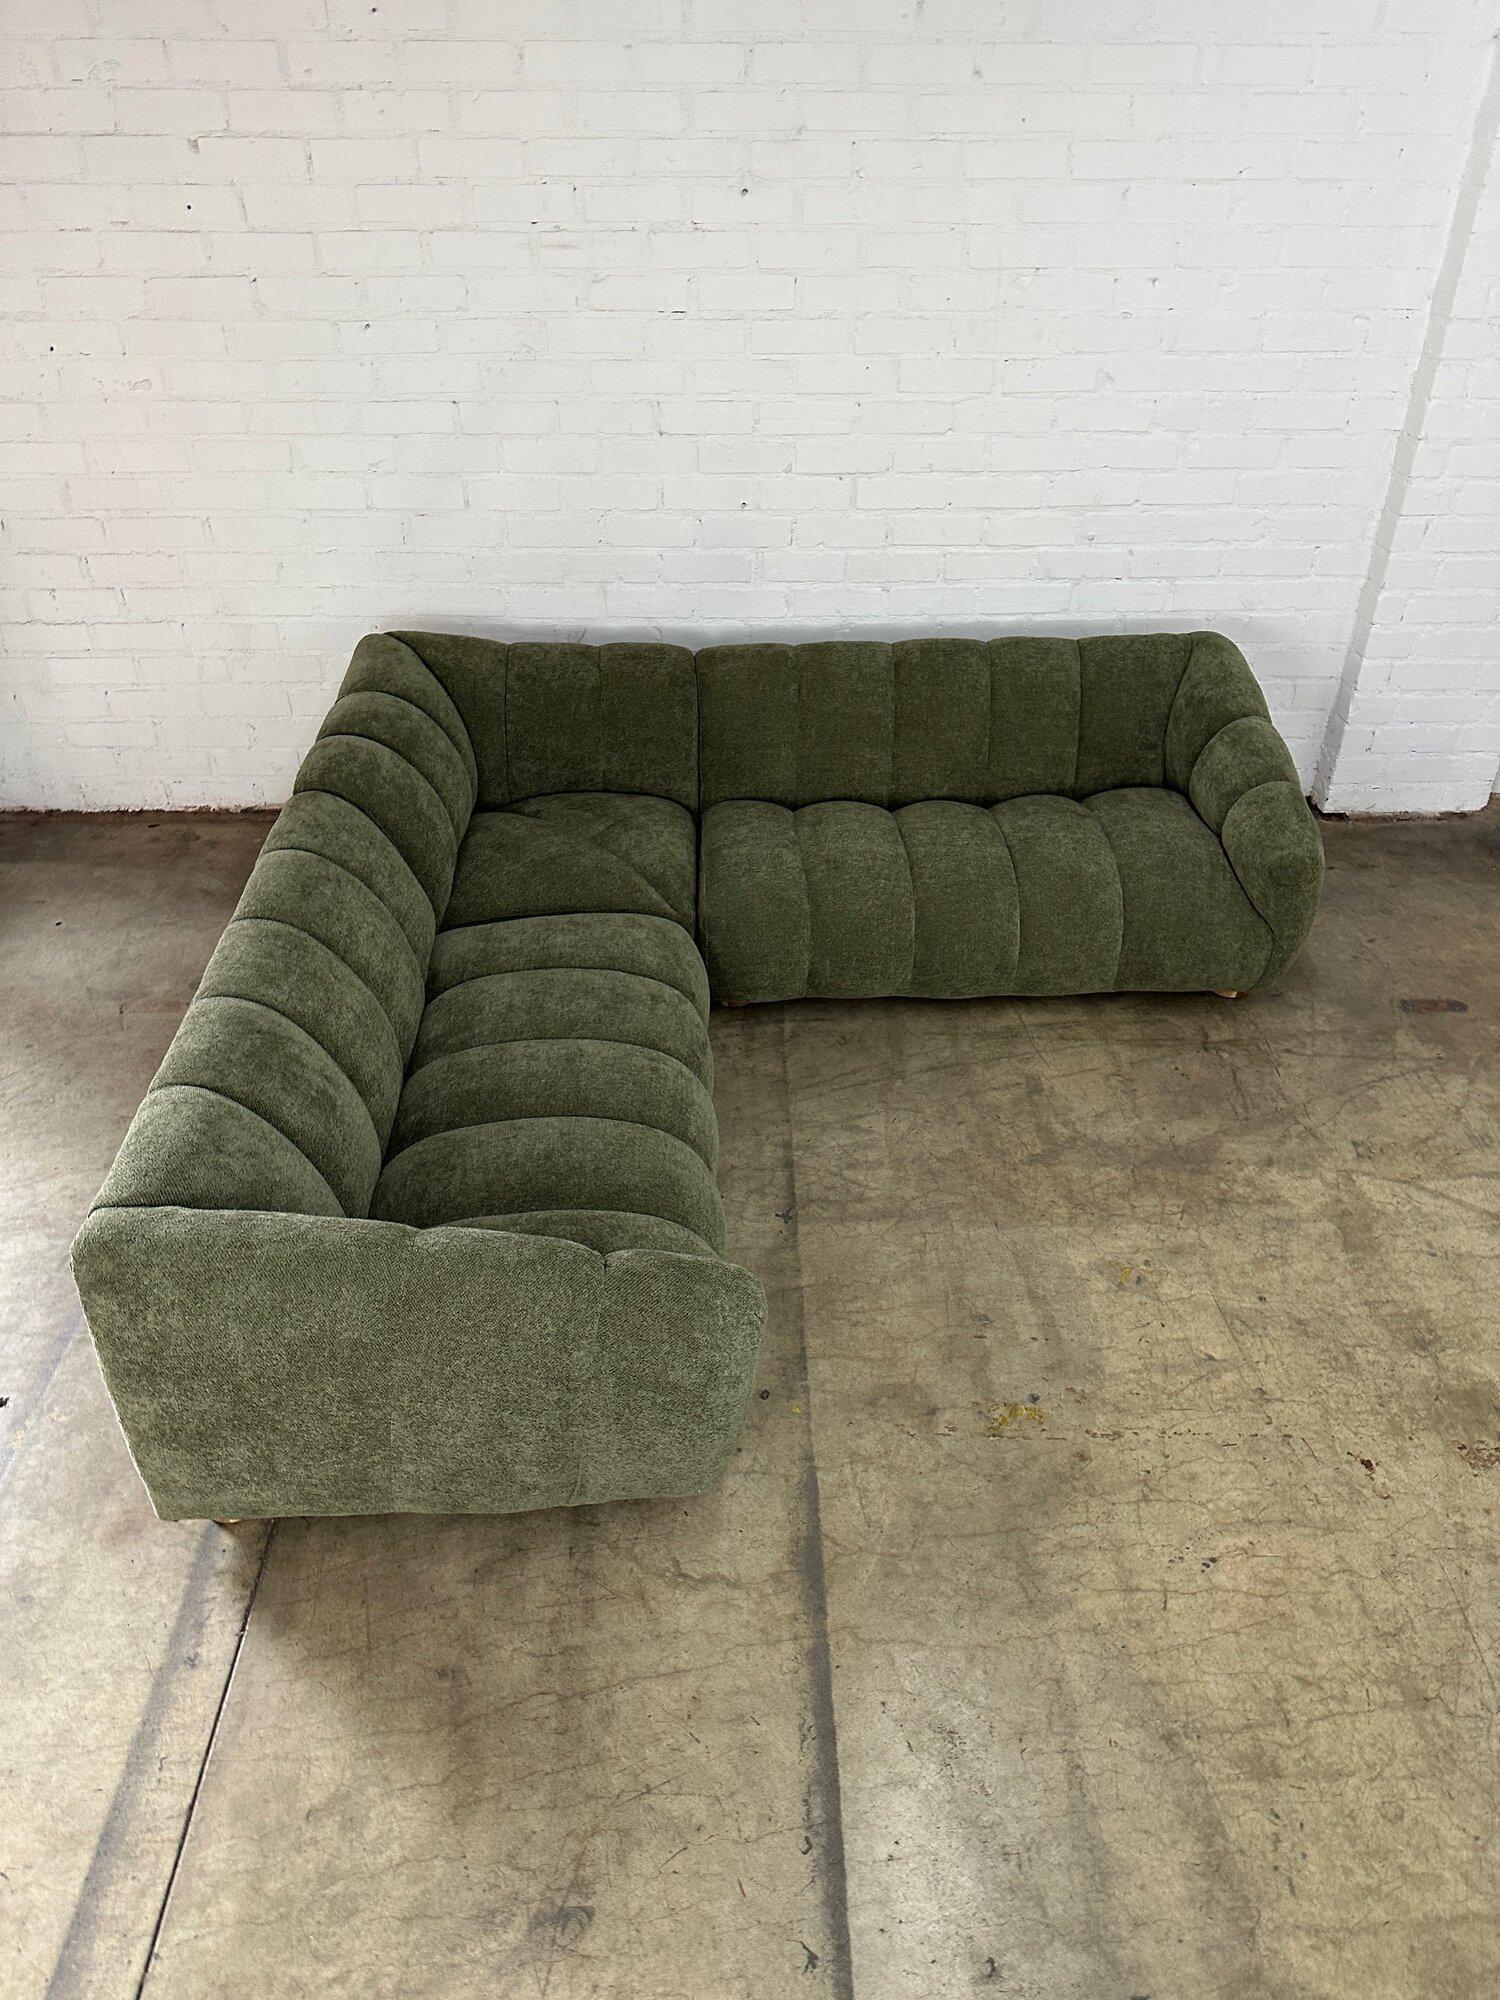 W96 D96 H26 SW75 SD24 SH13 AH22

Handcrafted sectional sofa made from scratch in house. Each unit is completely modular and feature both feather and foam for great comfort. Item has green nubby boucle and sit on low solid white oak legs. Price is